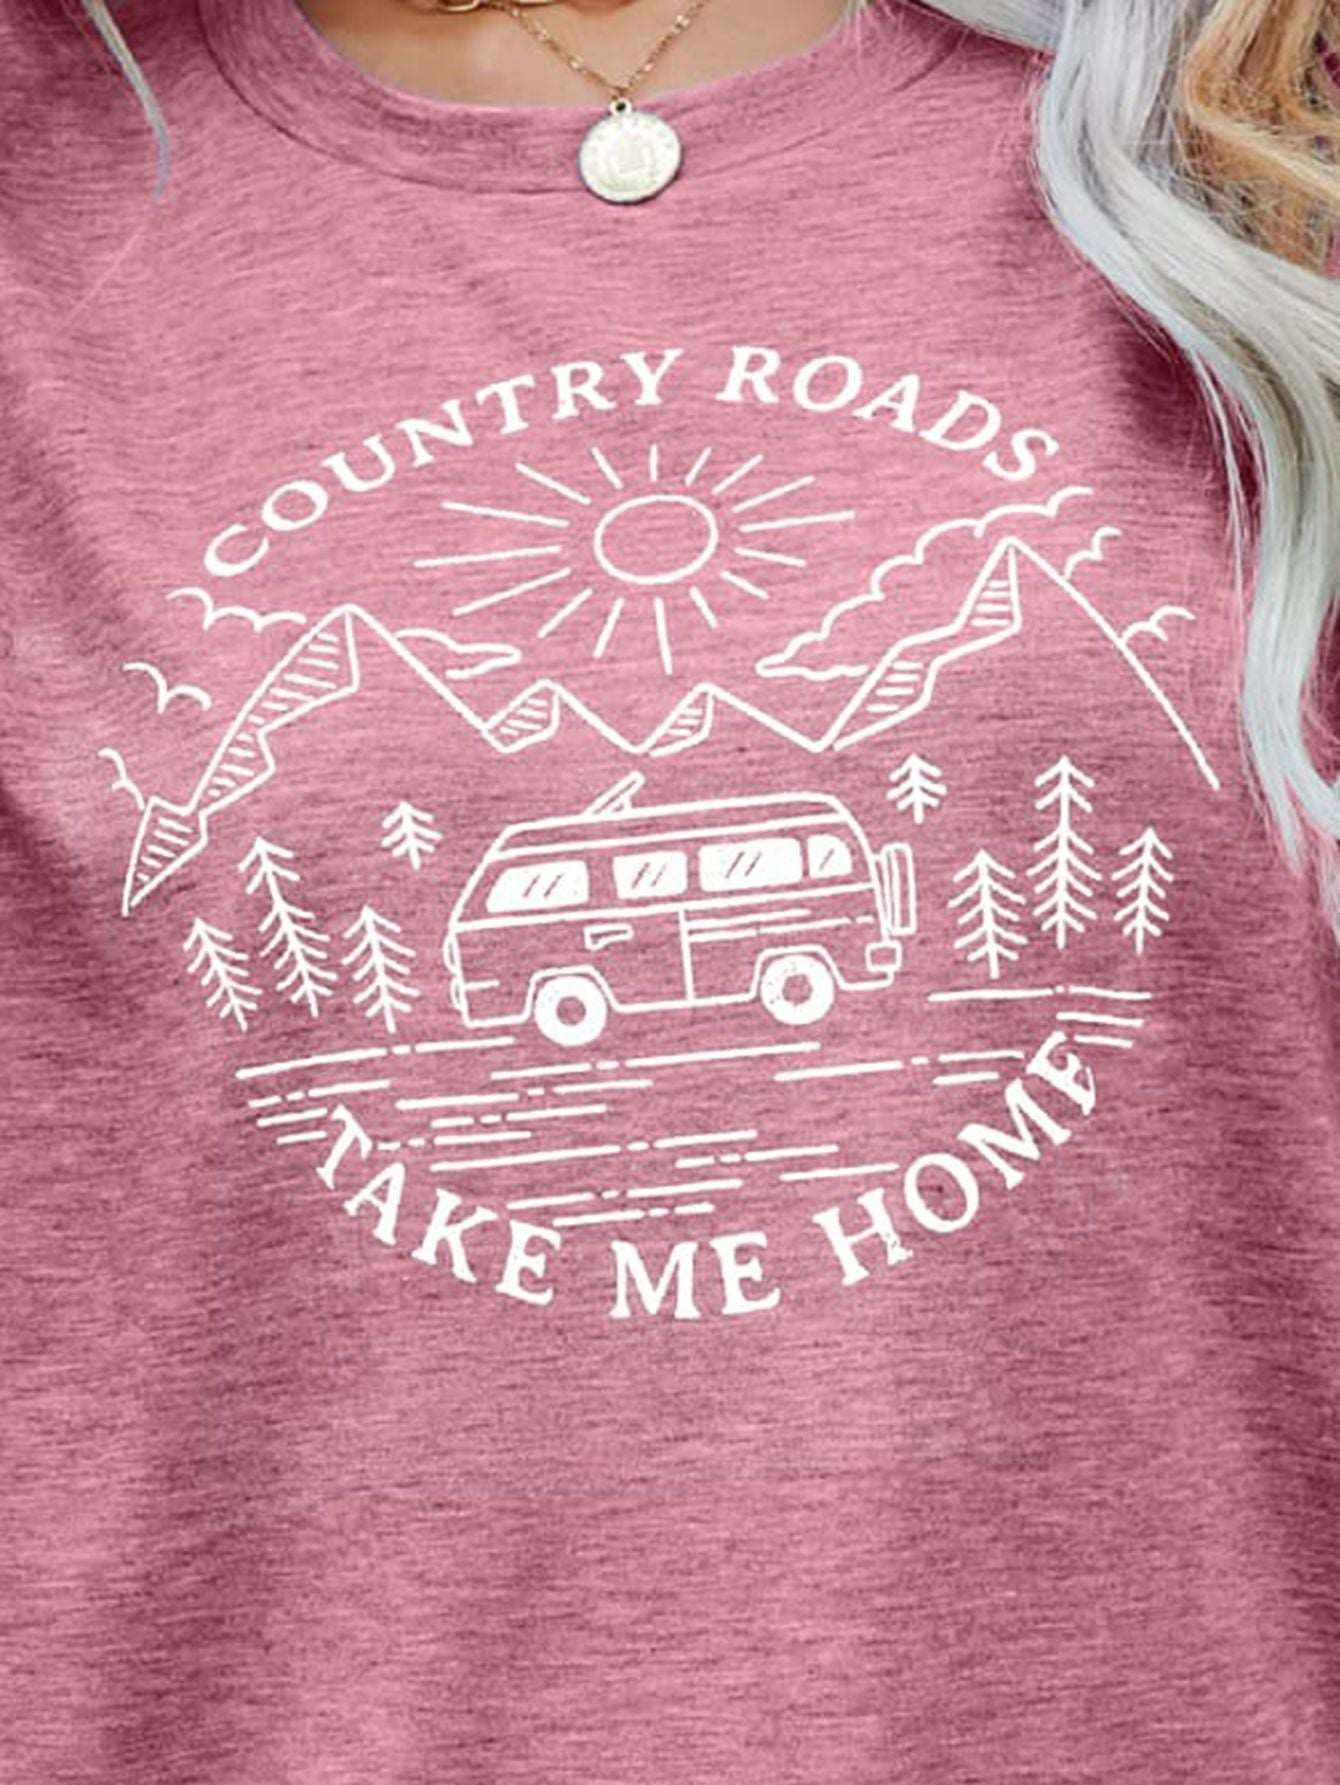 COUNTRY ROADS TAKE ME HOME Graphic Tee (5 Colors)  Krazy Heart Designs Boutique   